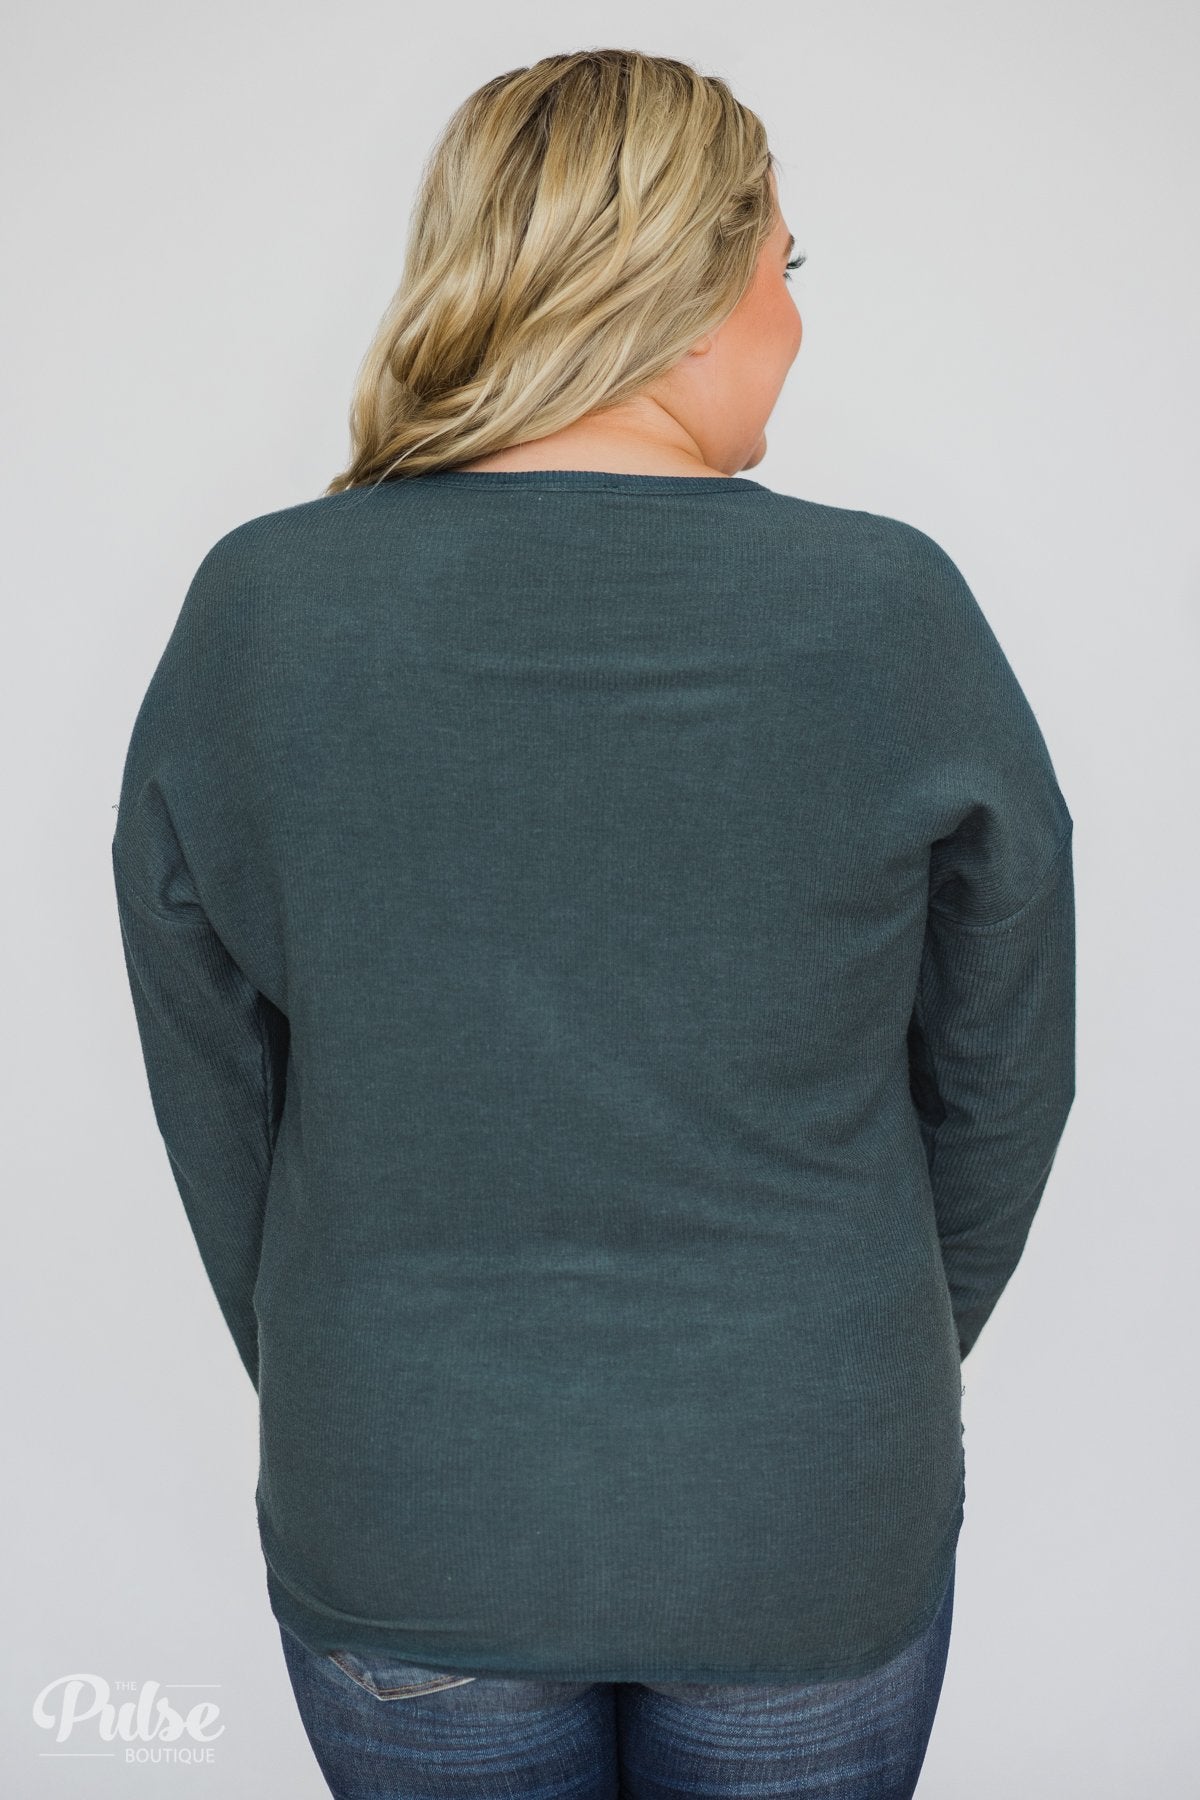 Won't be Long Button & Tie Top- Deep Teal